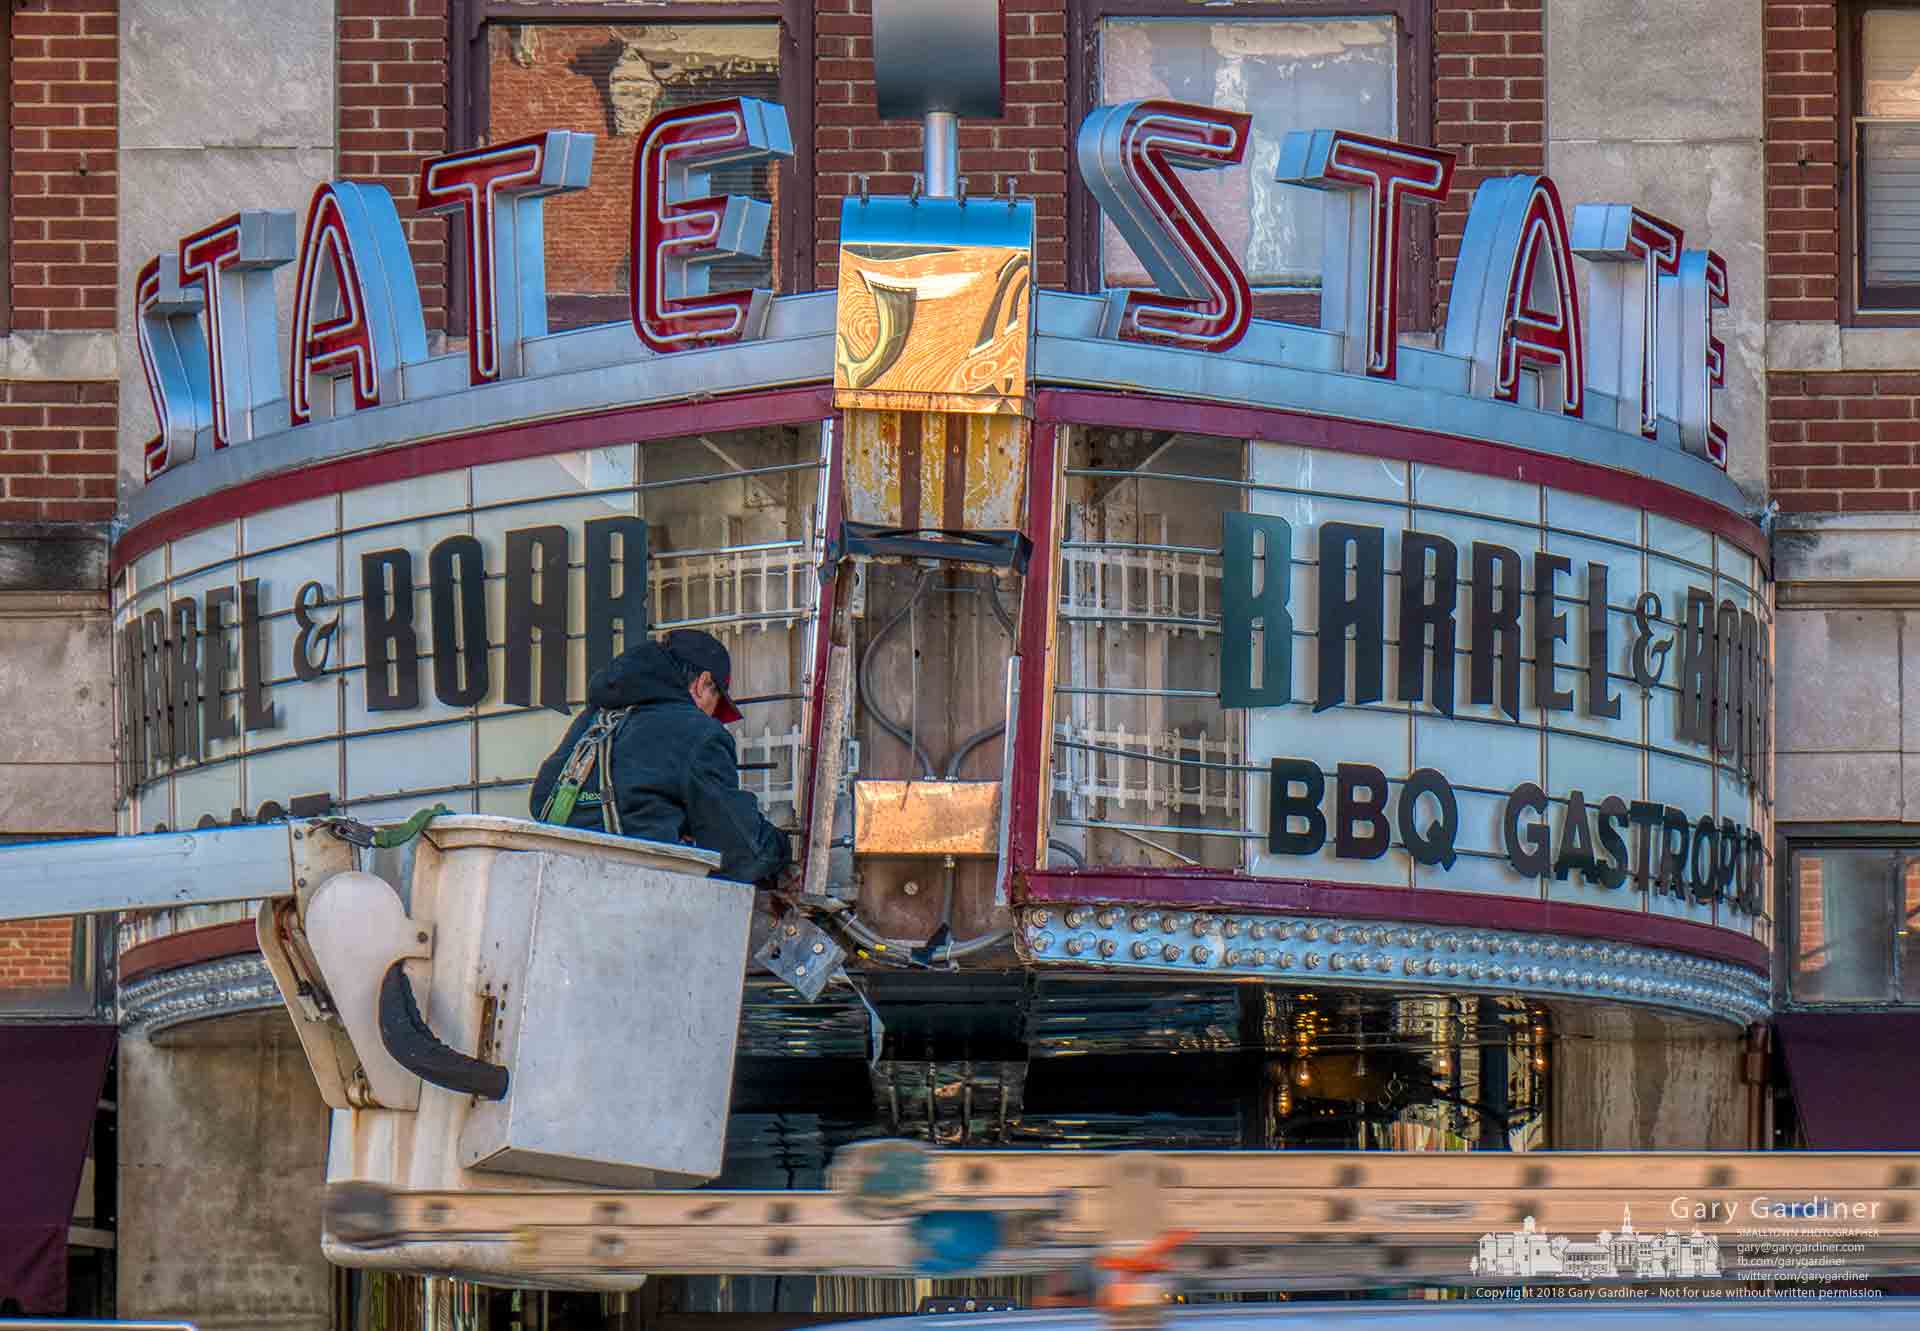 A sign company worker measures sections of the Barrel & Boar marquee as the company prepares to repair the iconic sign in Uptown damaged by a delivery truck. My Final Photo for Oct. 18, 2018.